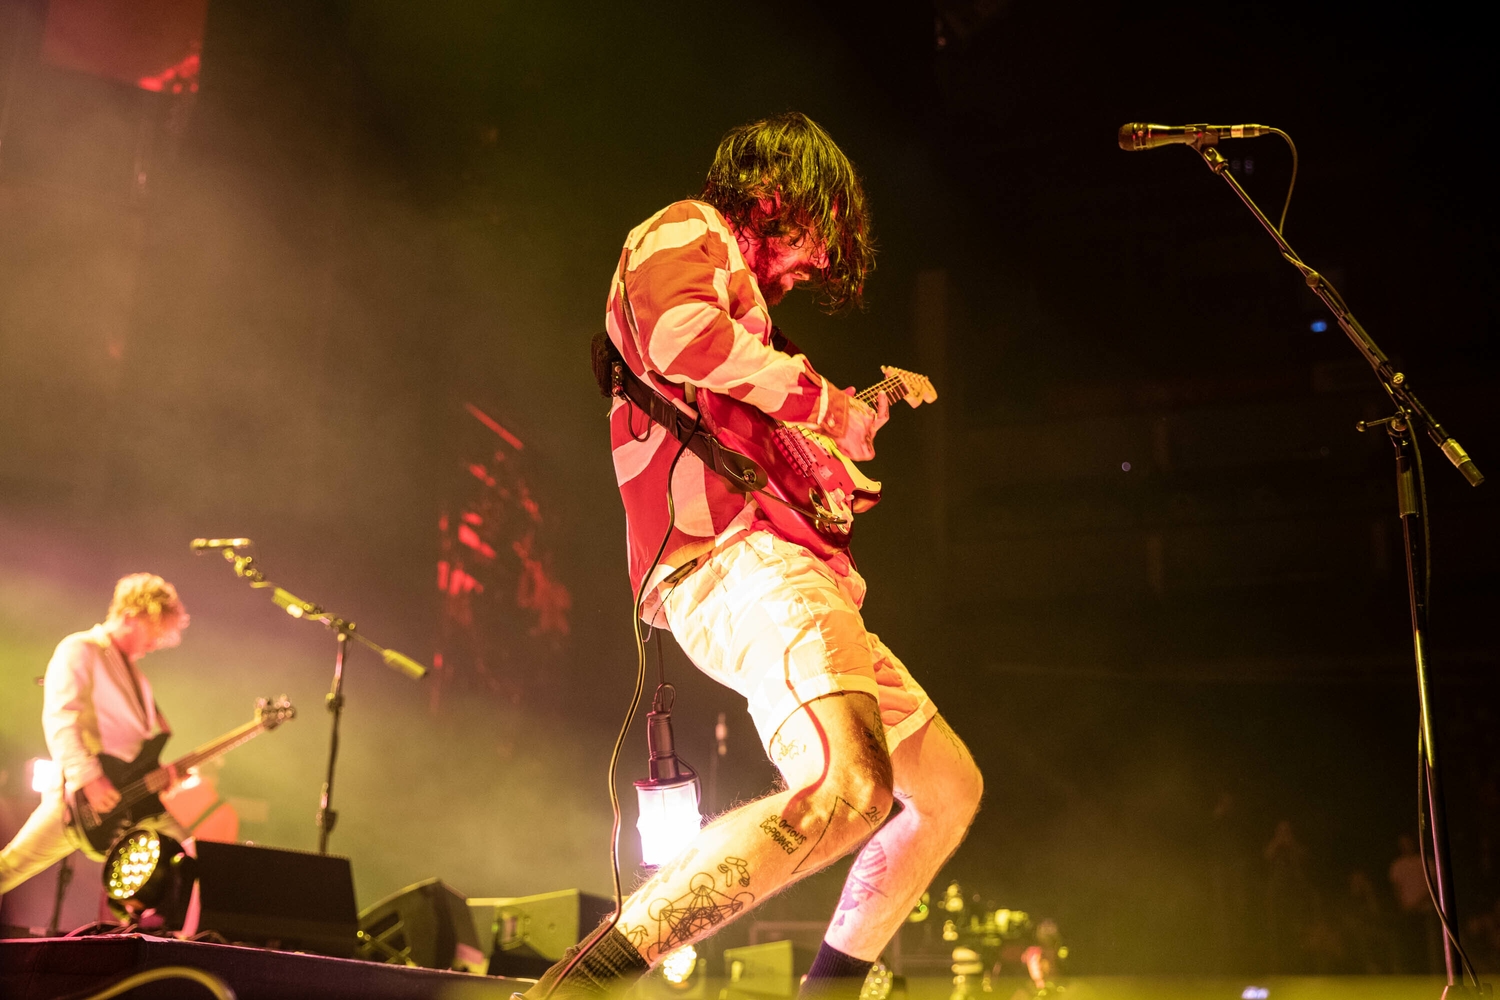 Biffy Clyro to celebrate first three albums with ‘A Celebration of Beginnings’ UK shows